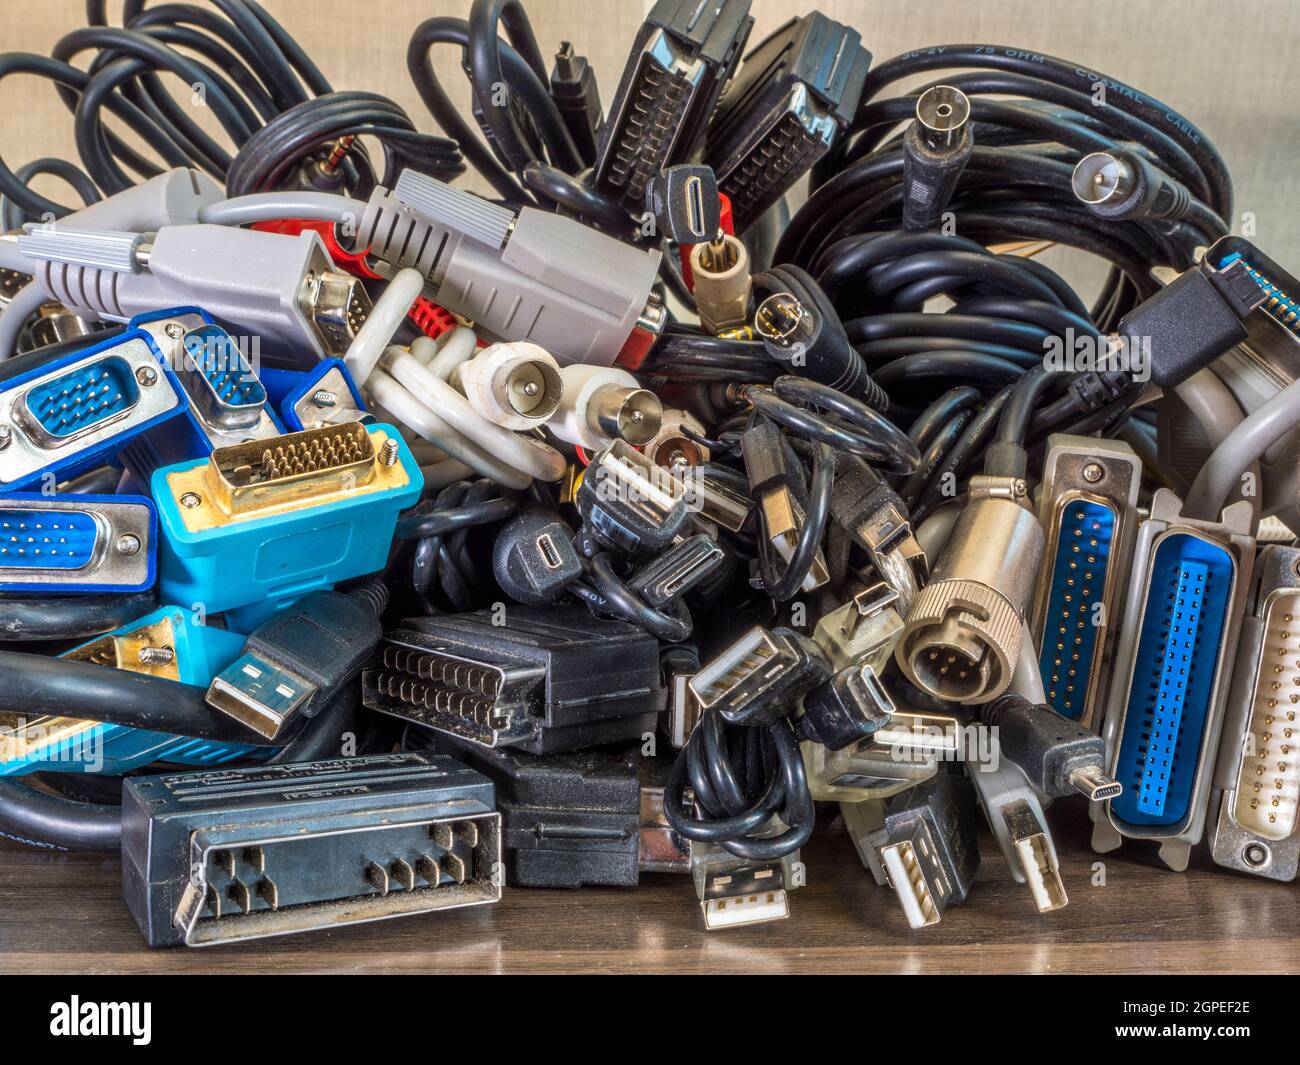 Closeup POV shot of a pile of old computer, audio, video and television cables / cords, with an assortment of plugs / sockets / connectors. Stock Photo